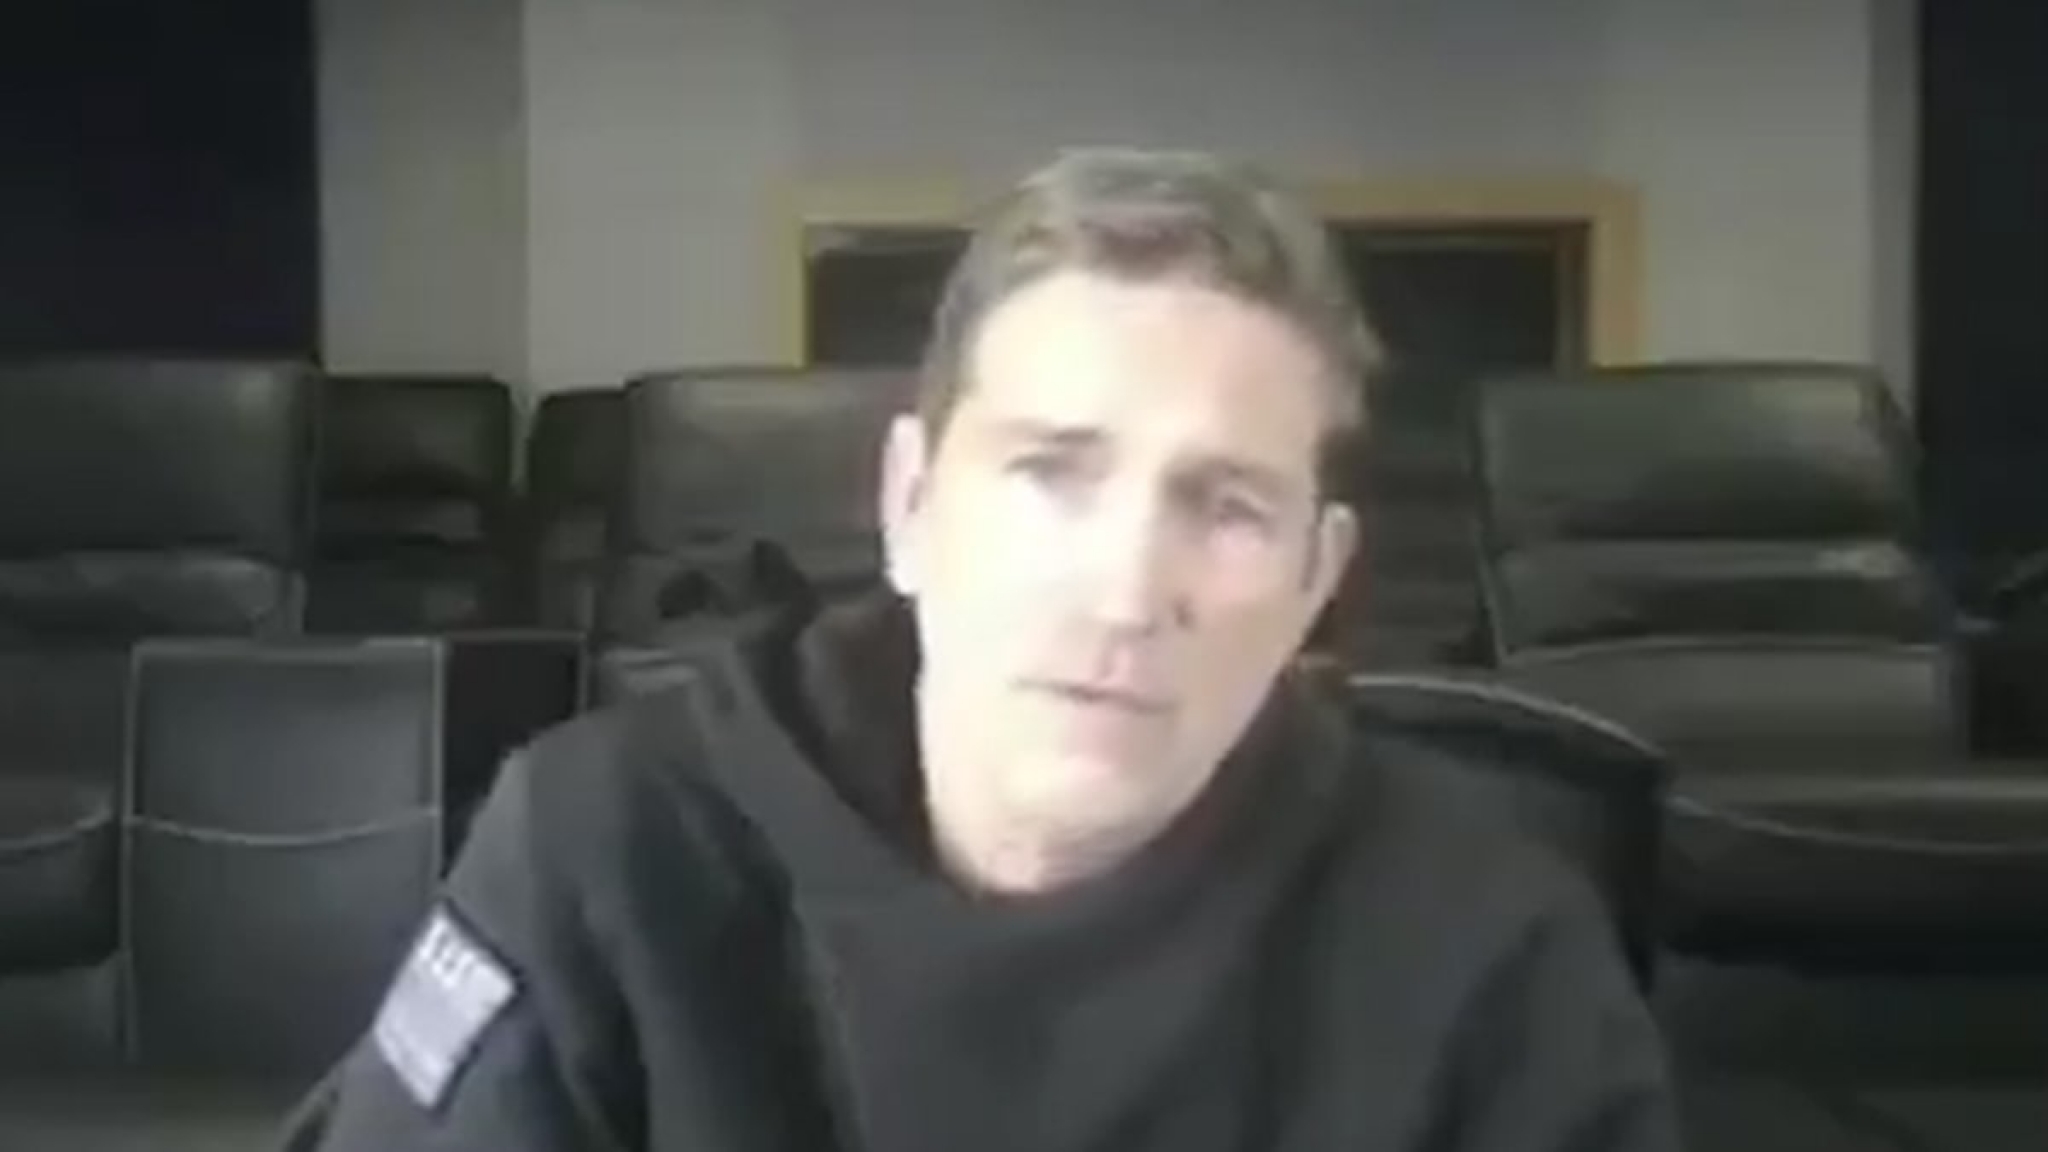 ‘Passion of the Christ’ Star Jim Caviezel Pushes Adrenochrome Conspiracy